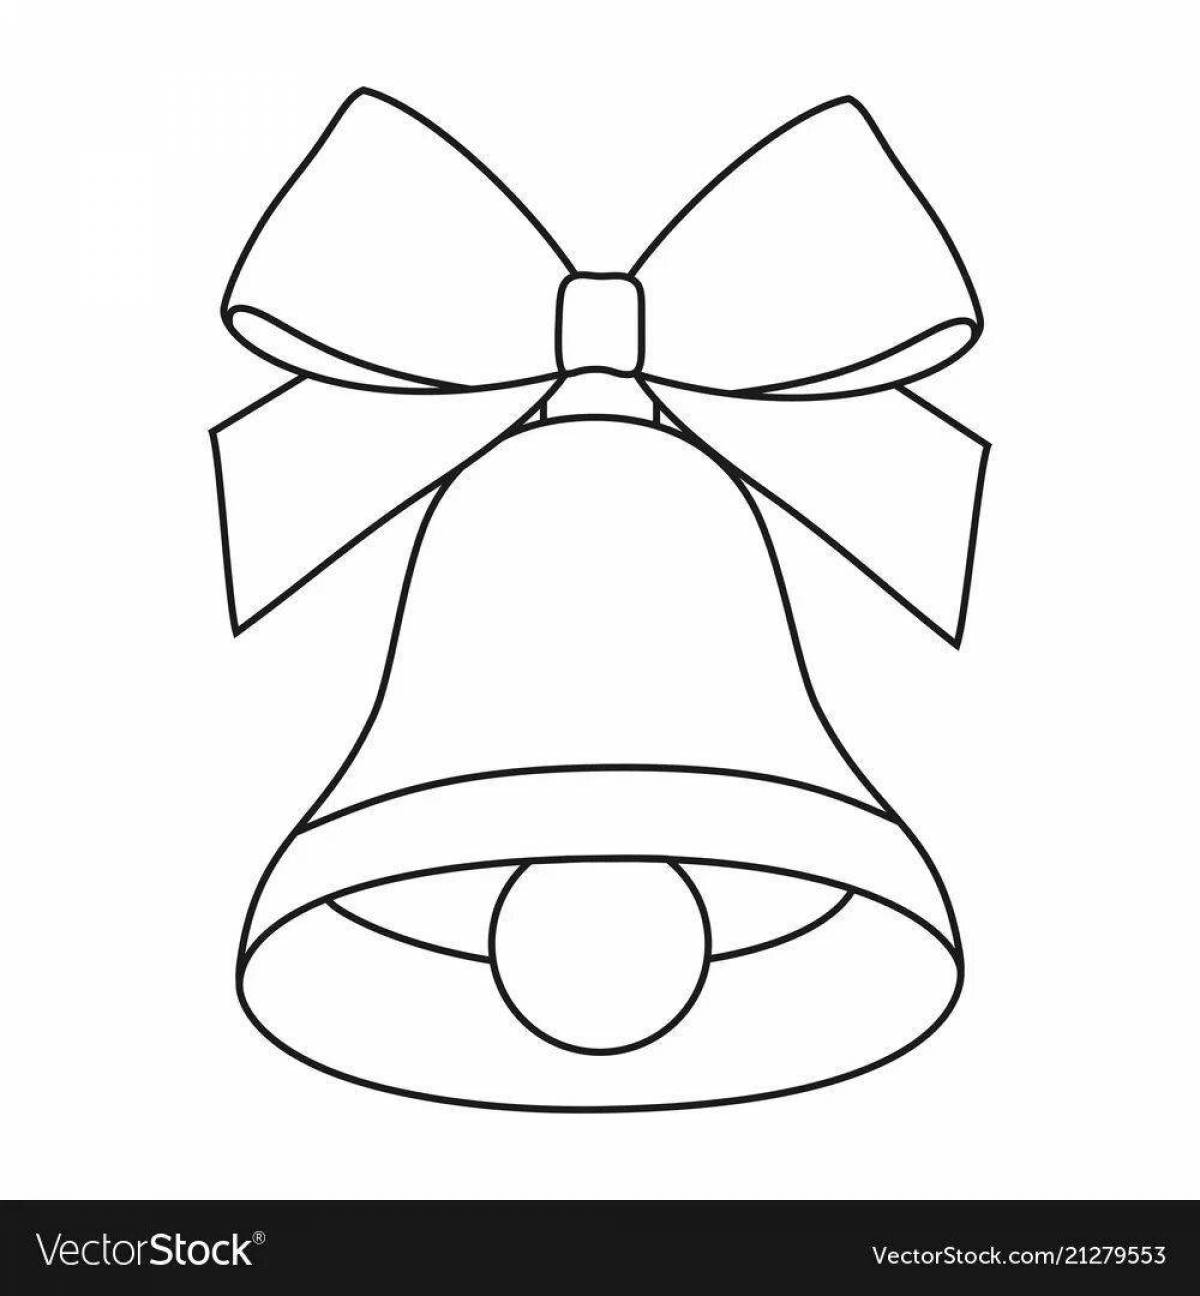 Colorful call coloring page